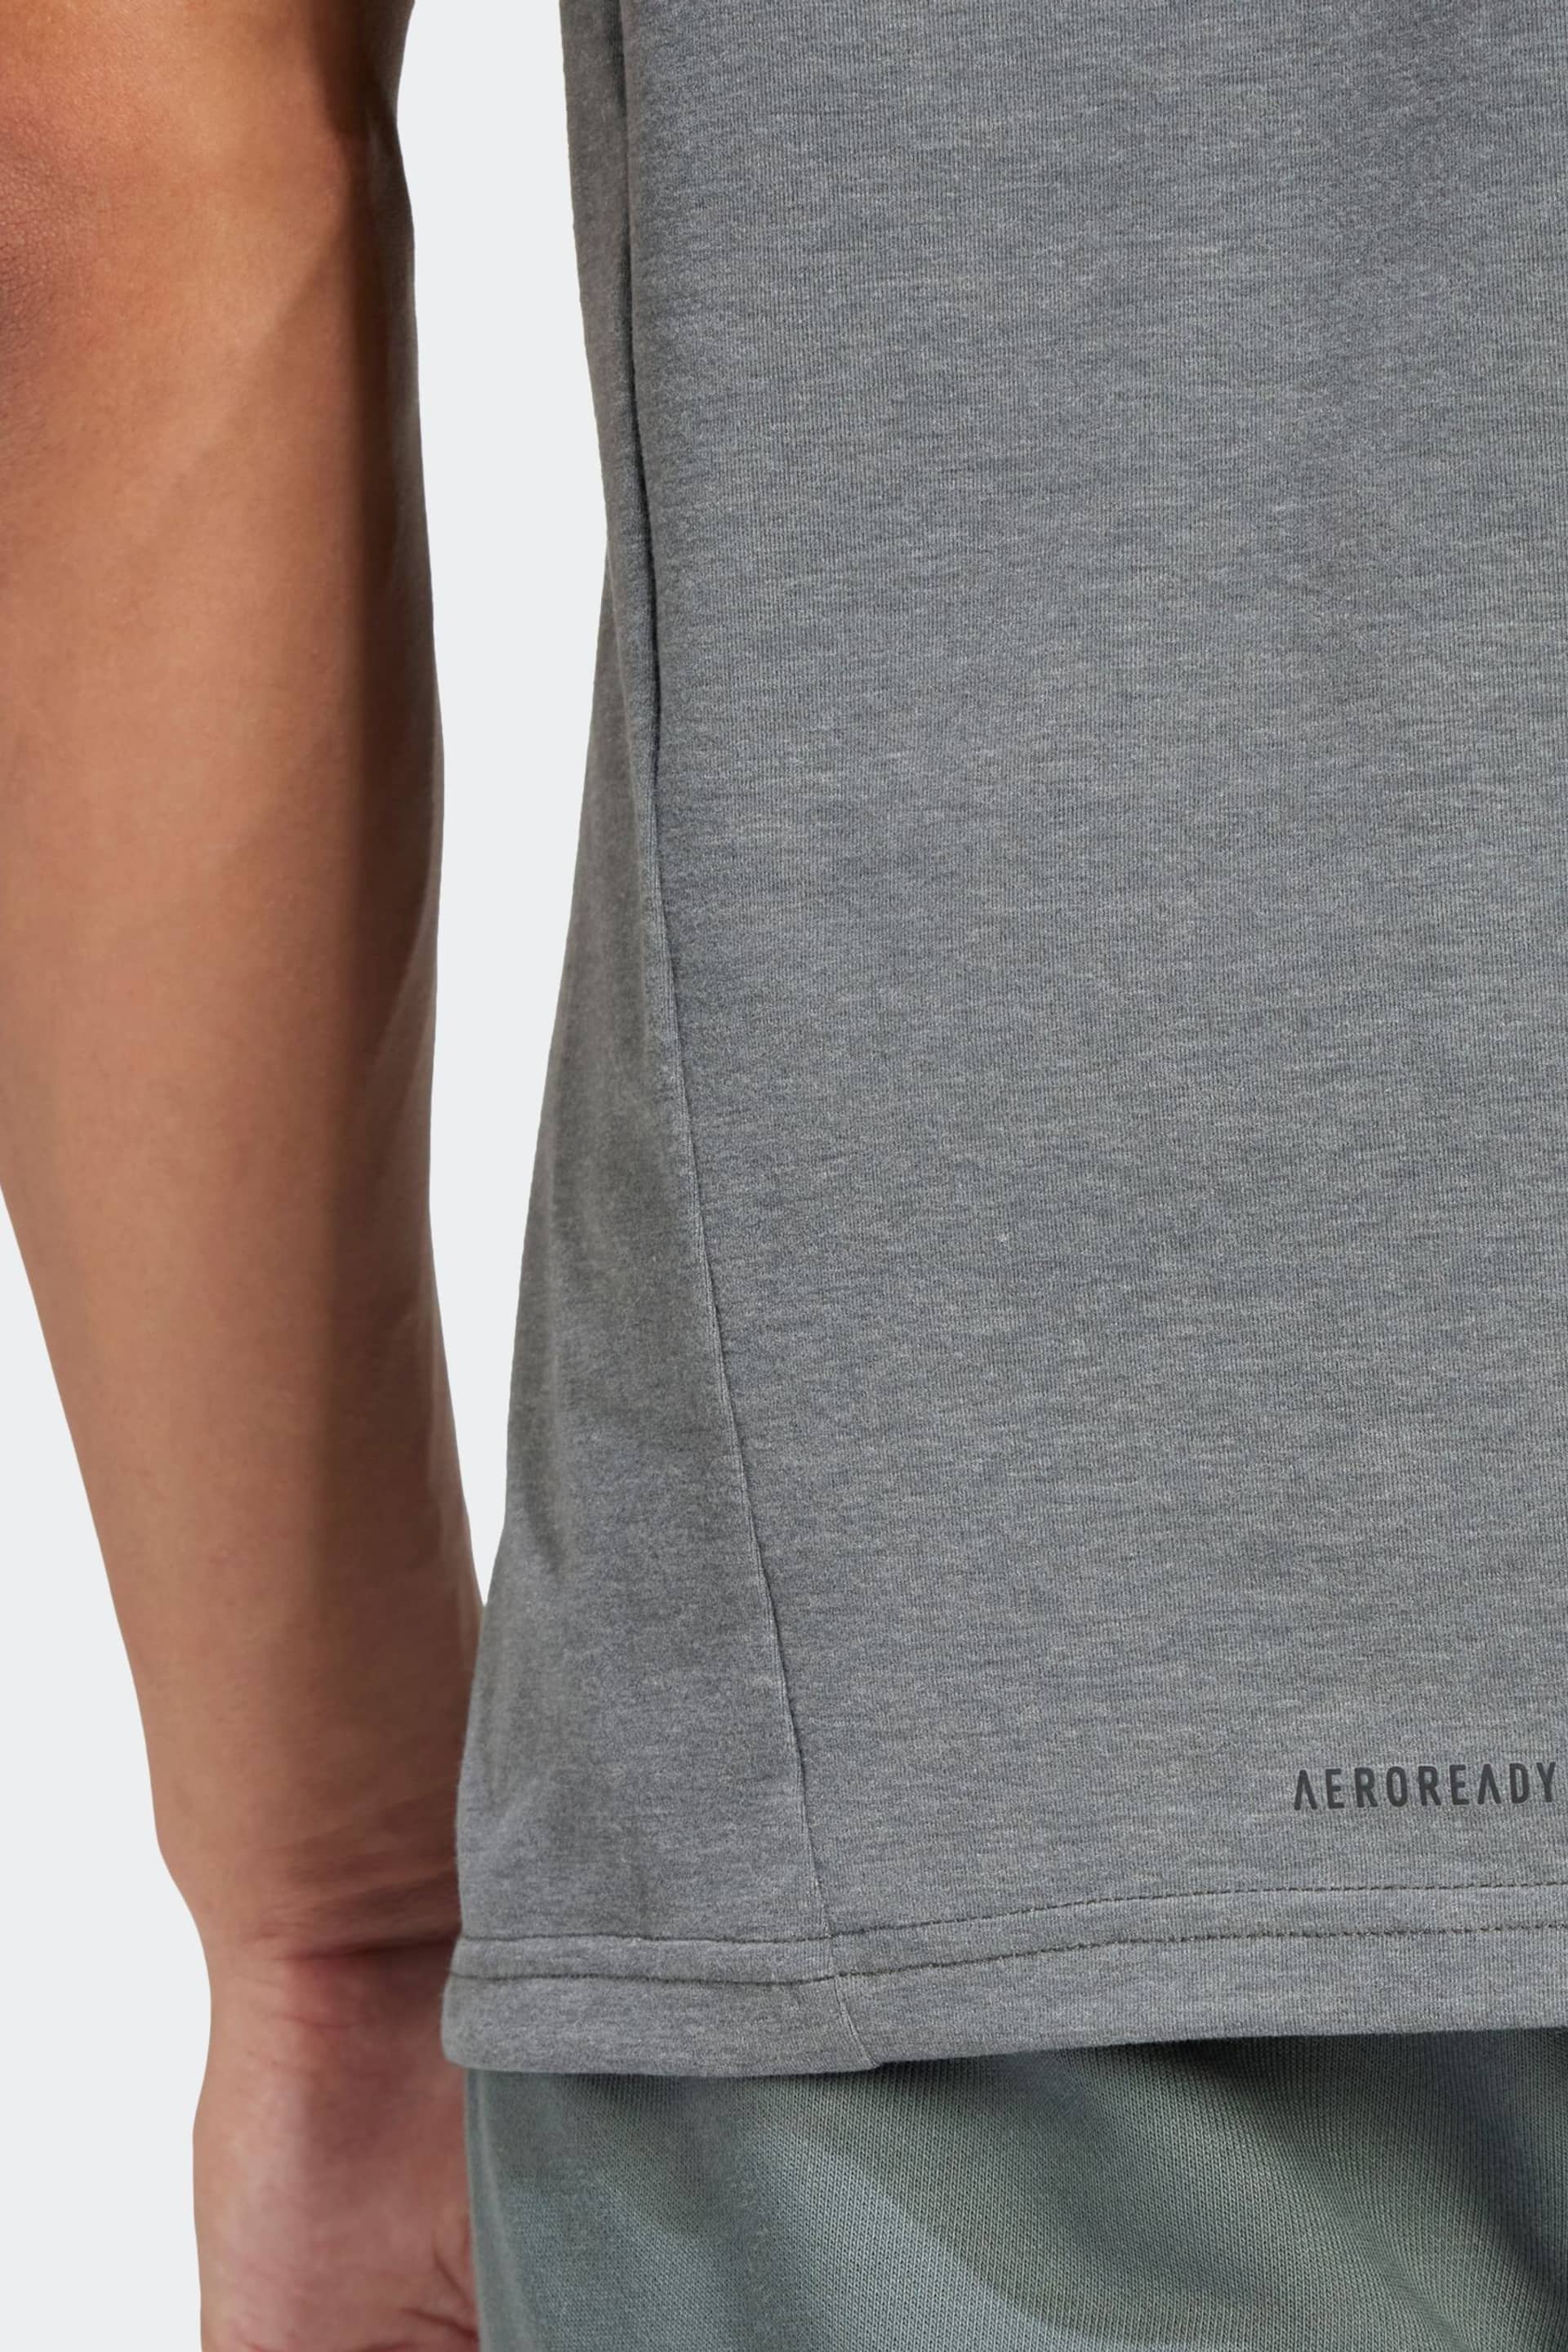 adidas Dark Grey Designed for Training Workout Tank Top - Image 6 of 7